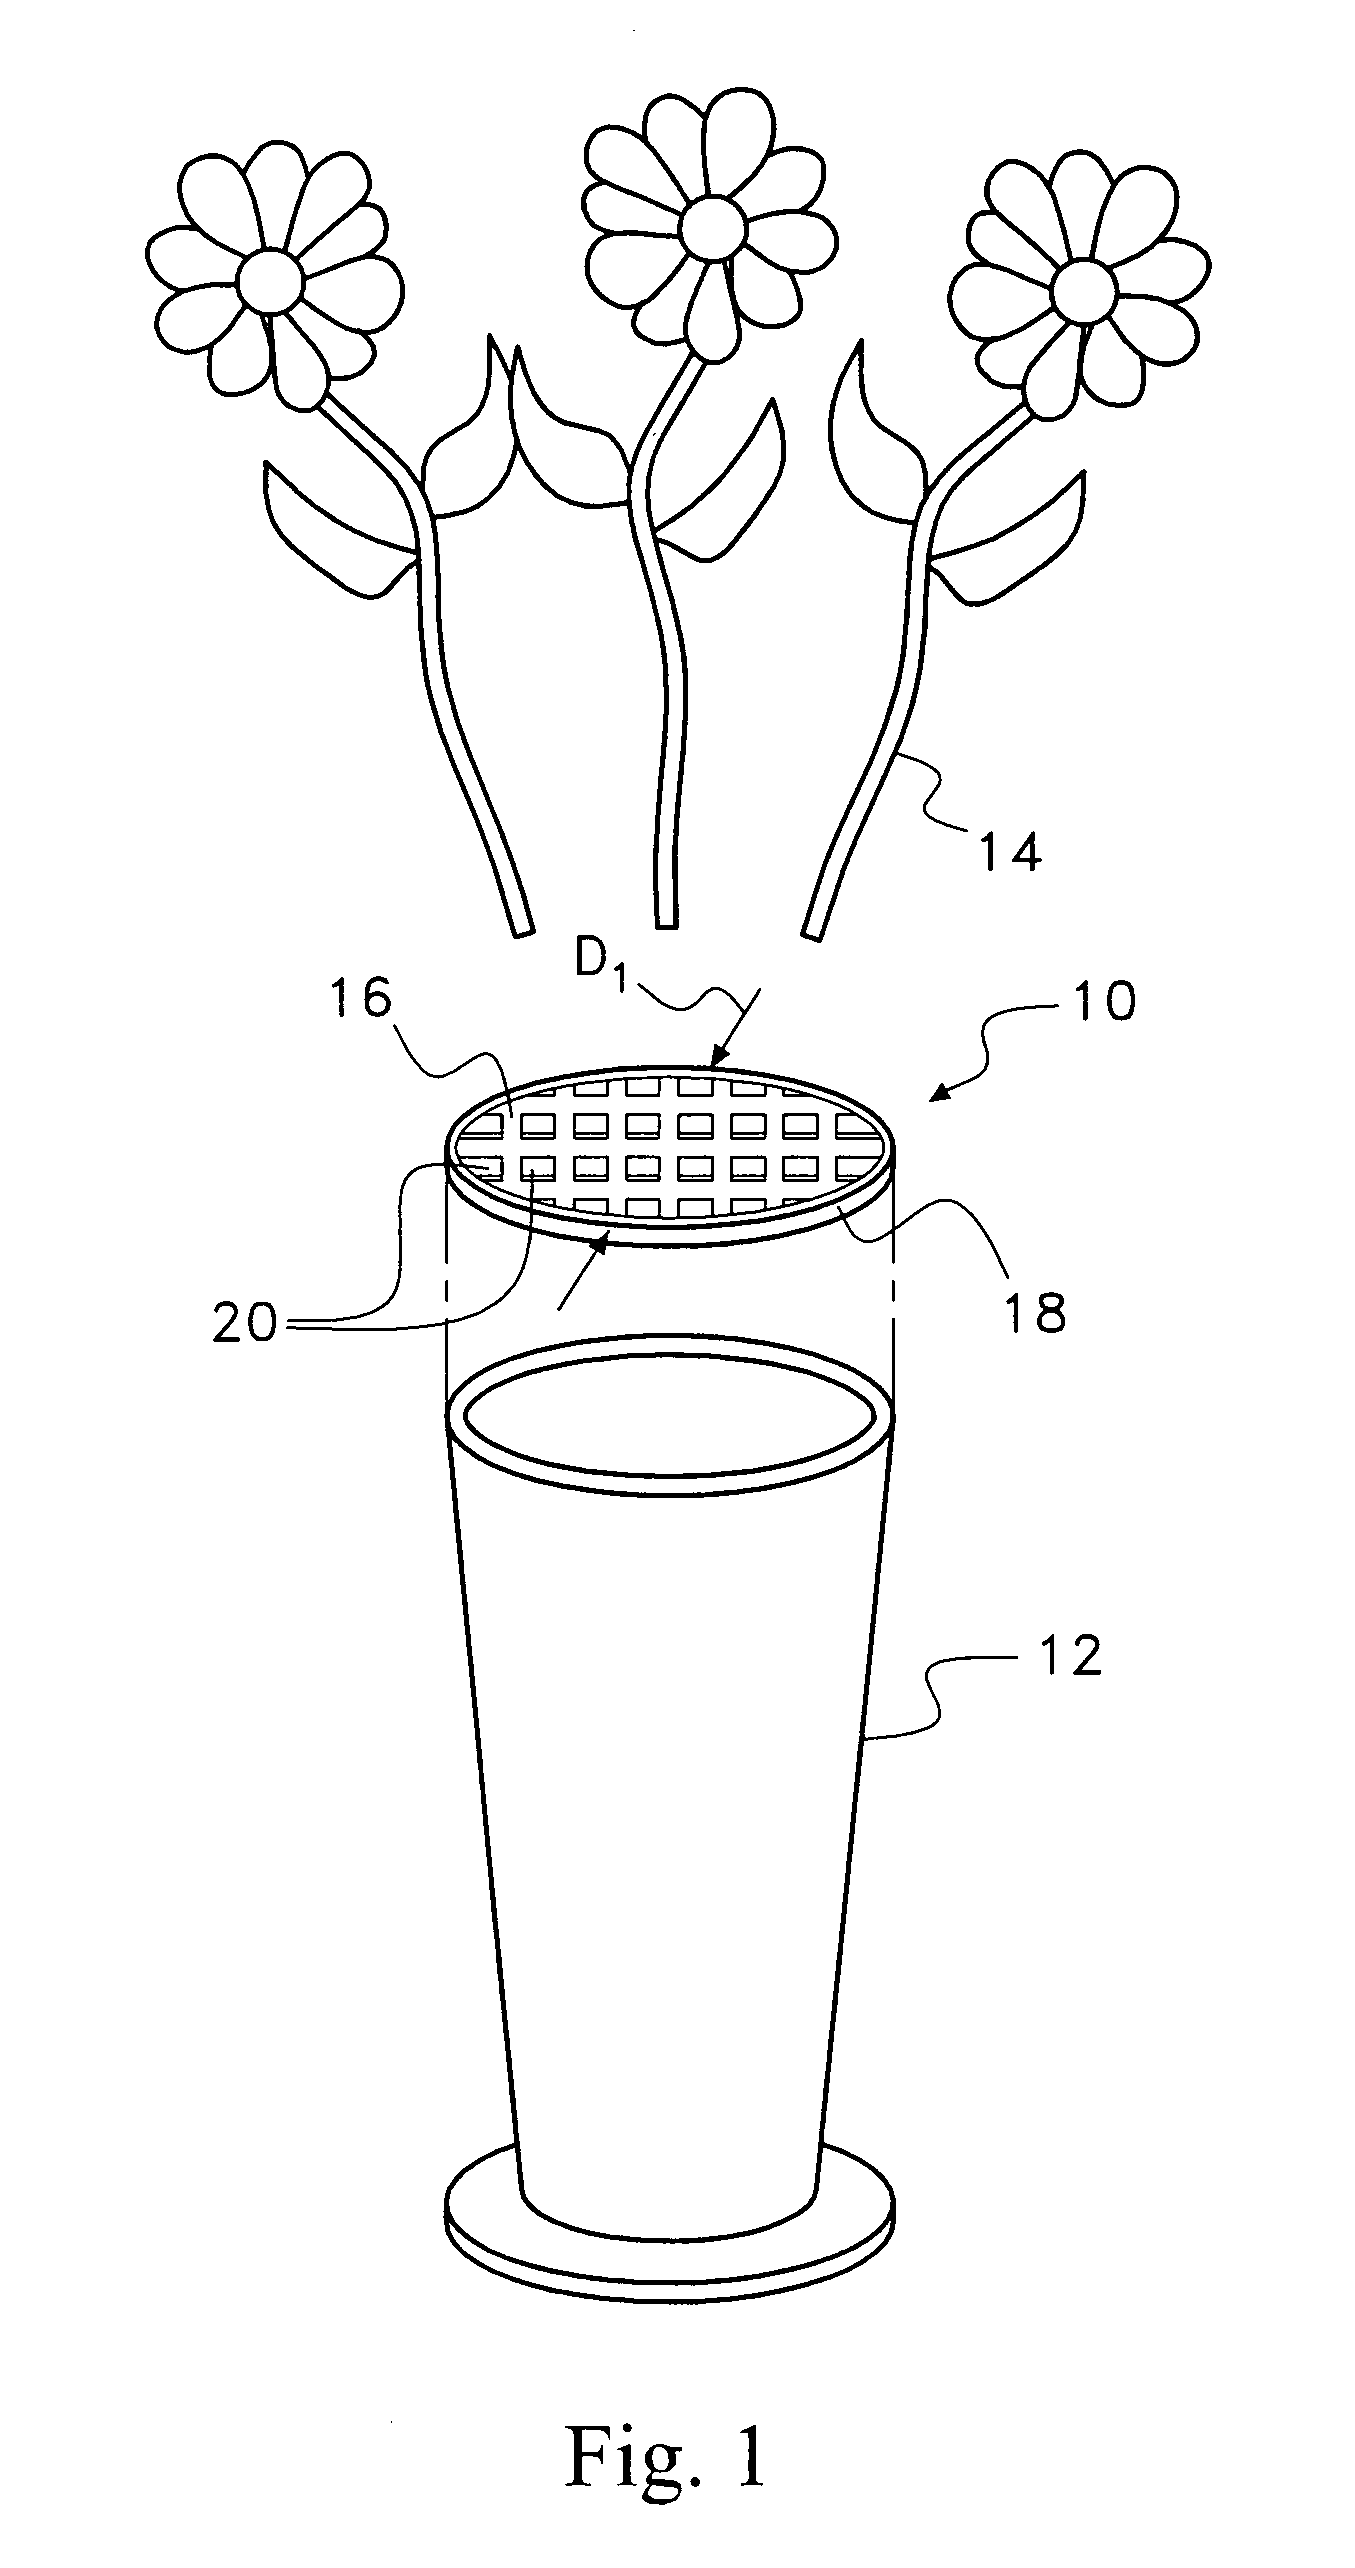 Device and method for adapting a container for use in a floral arrangement